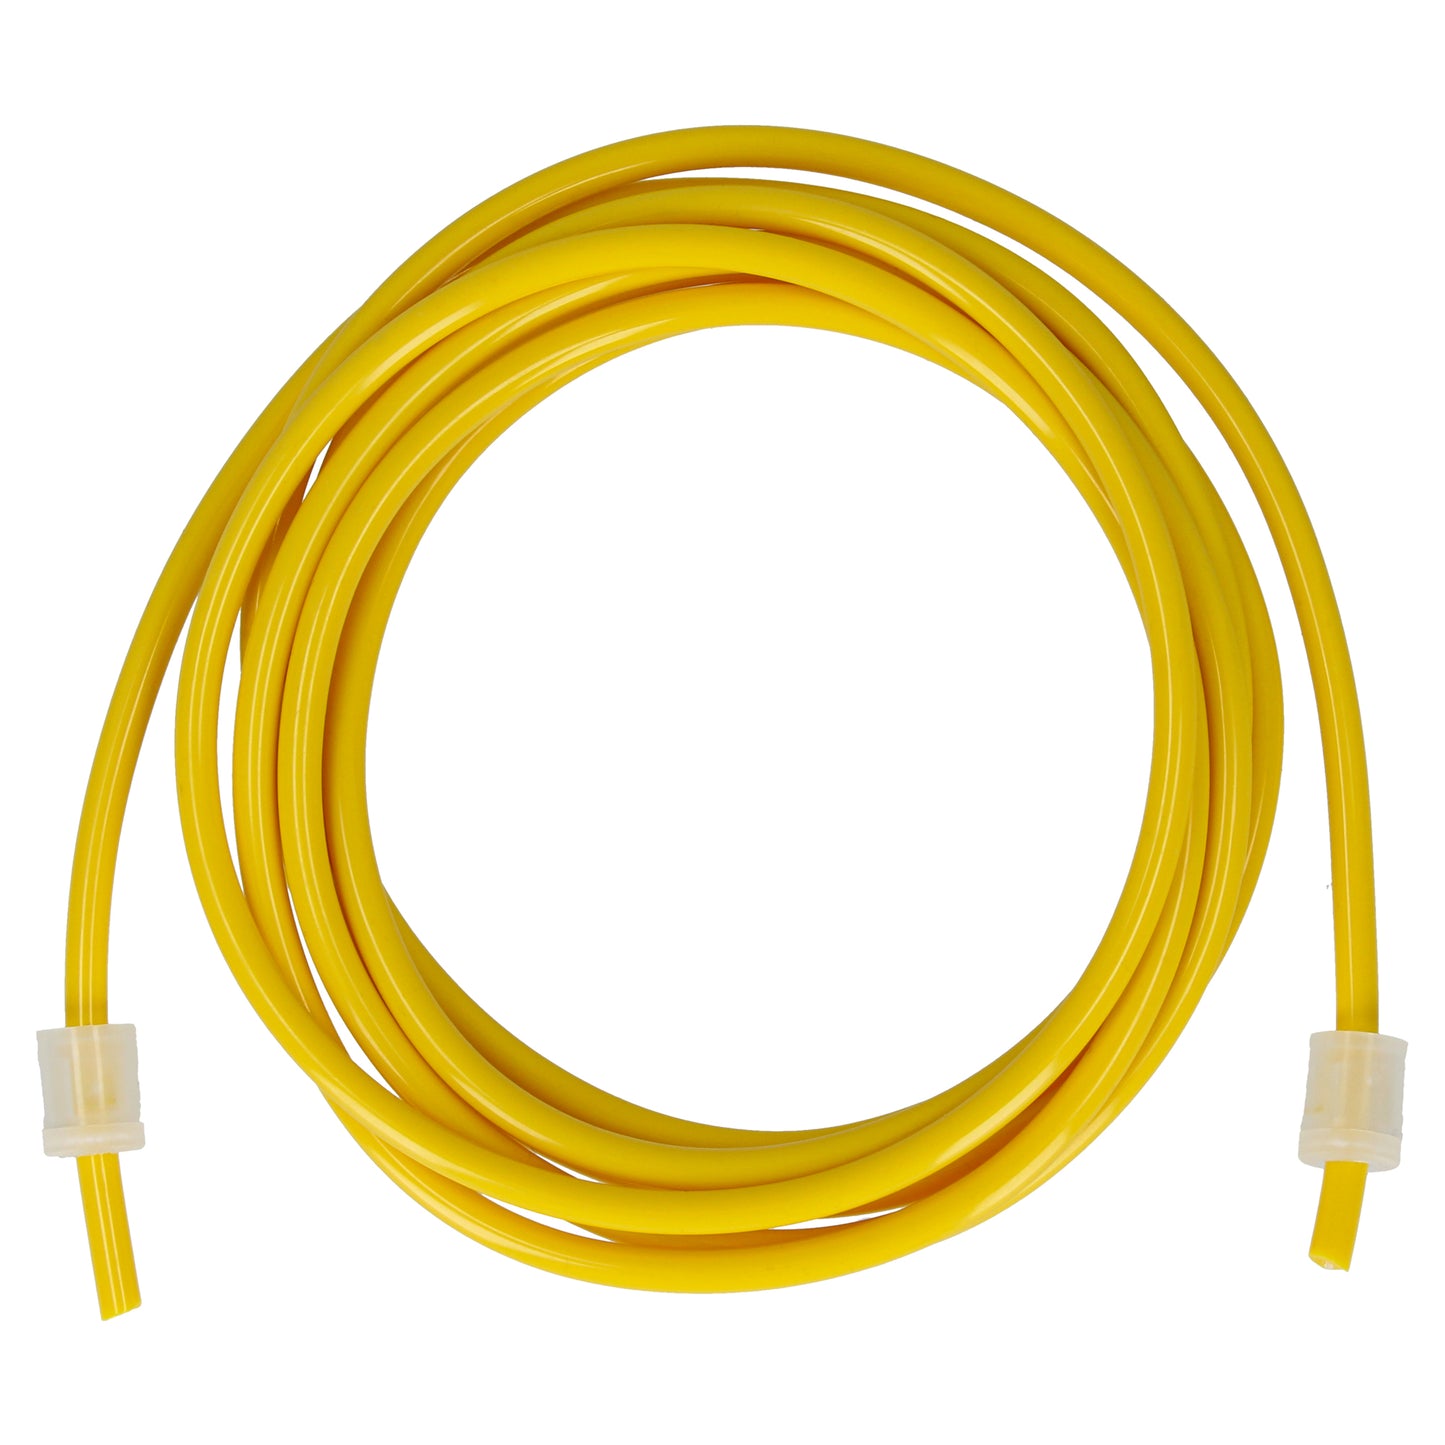 Replacement PVC cord